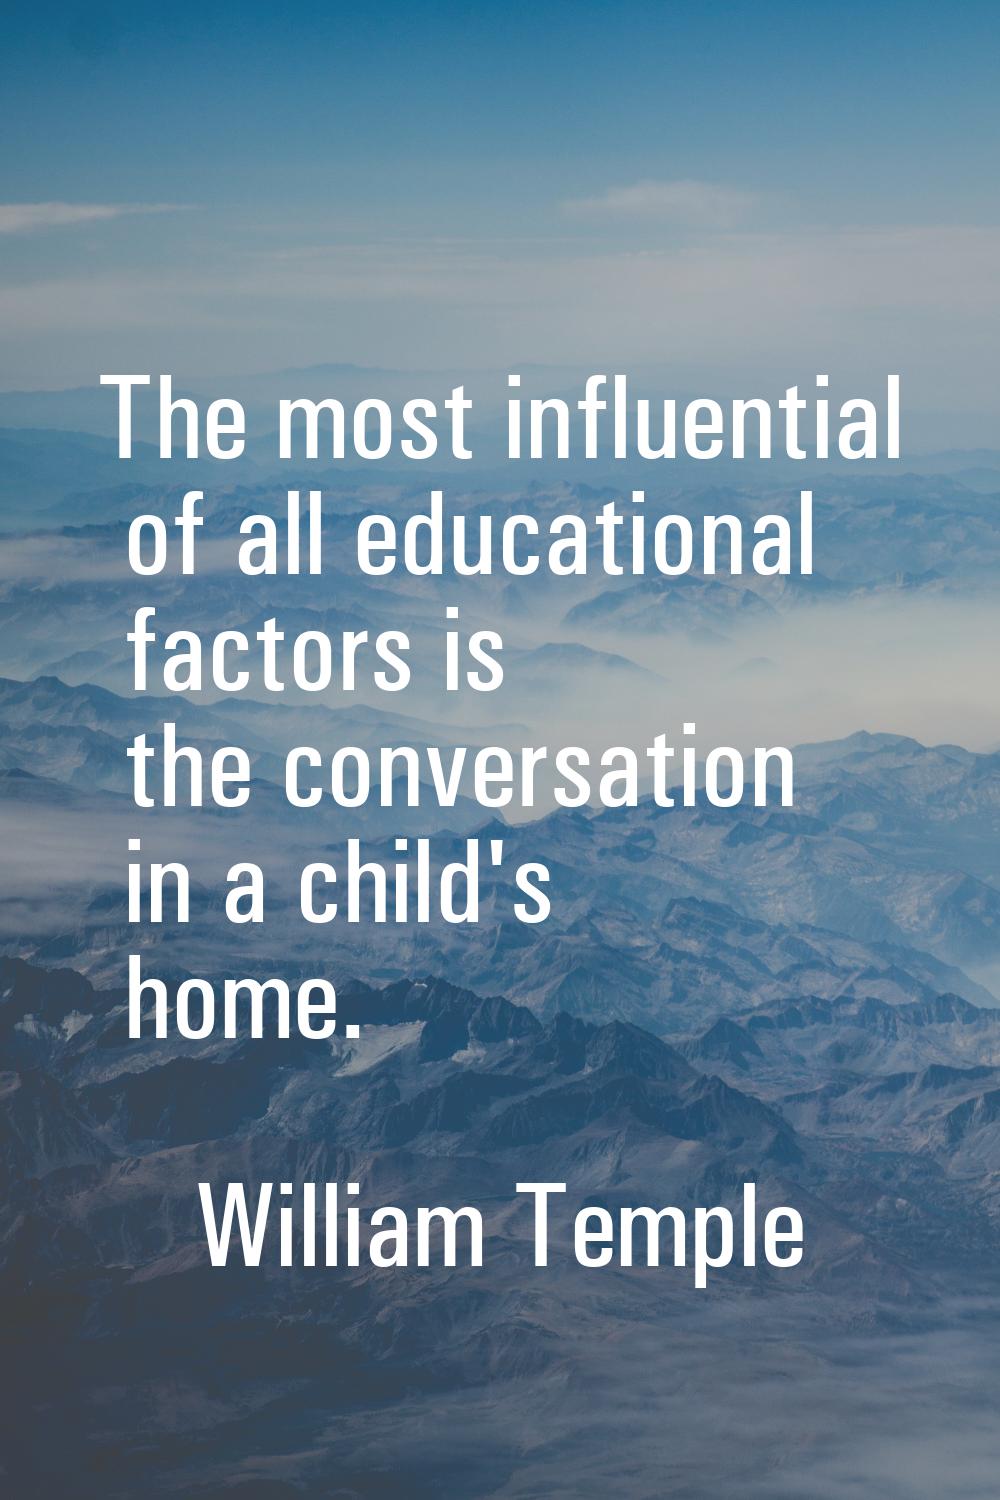 The most influential of all educational factors is the conversation in a child's home.